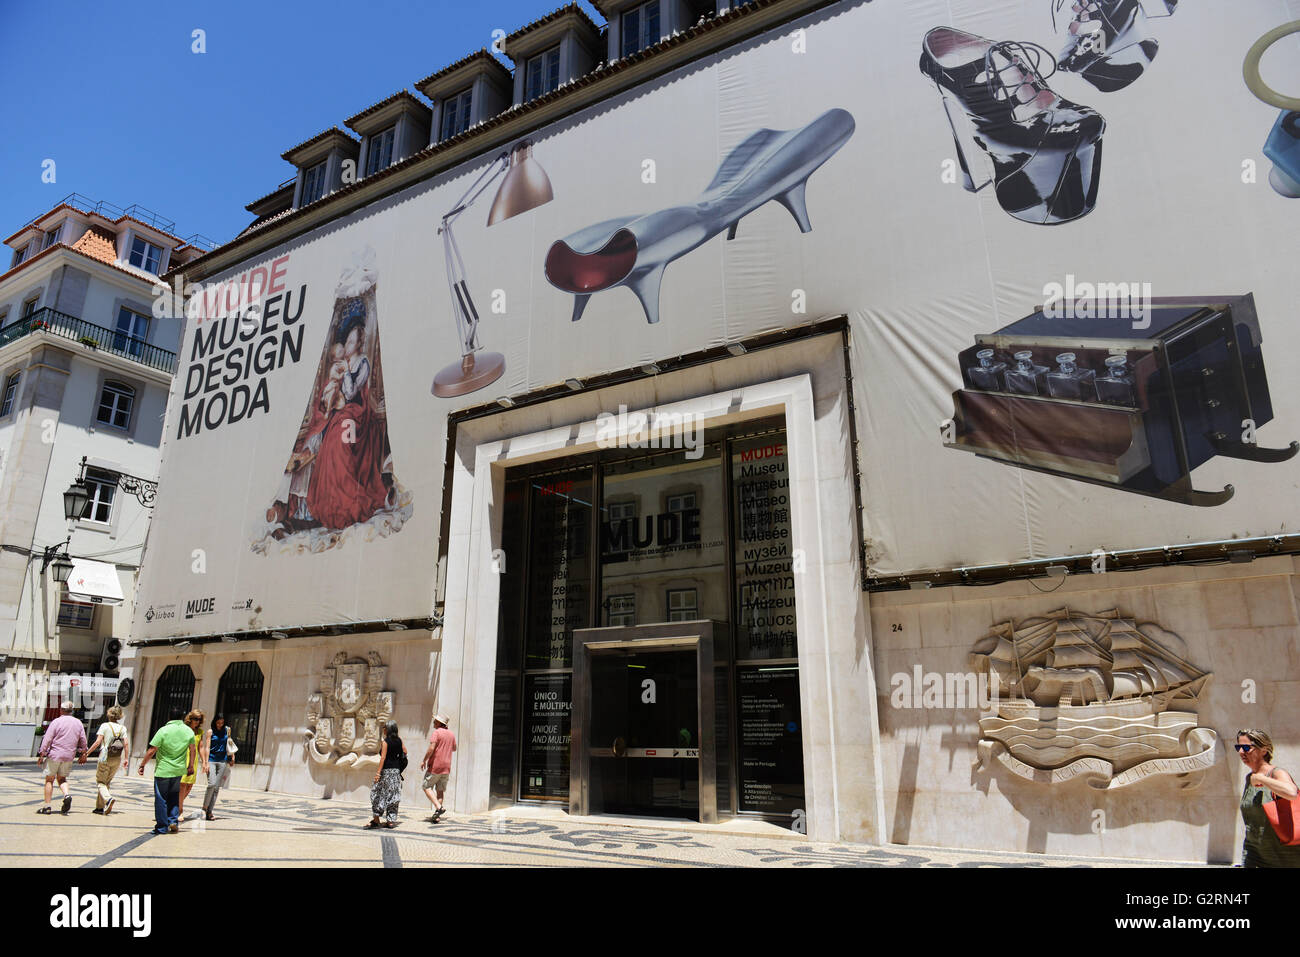 Mude- Museum of design MODA on Rua Augusta in the old city of Lisbon. Stock Photo